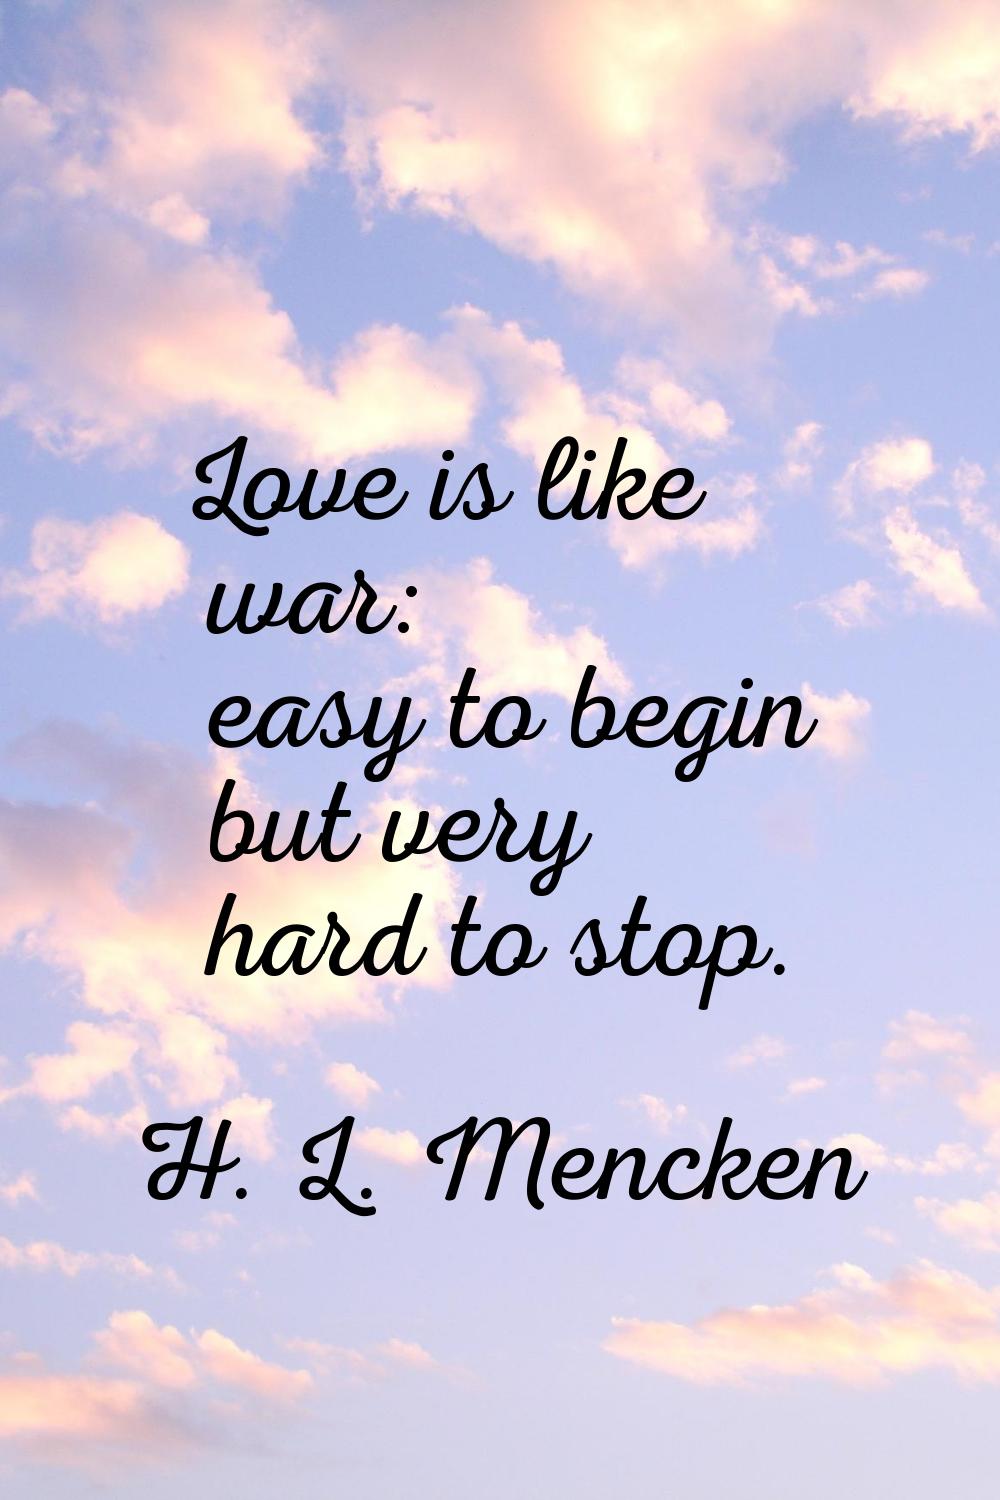 Love is like war: easy to begin but very hard to stop.